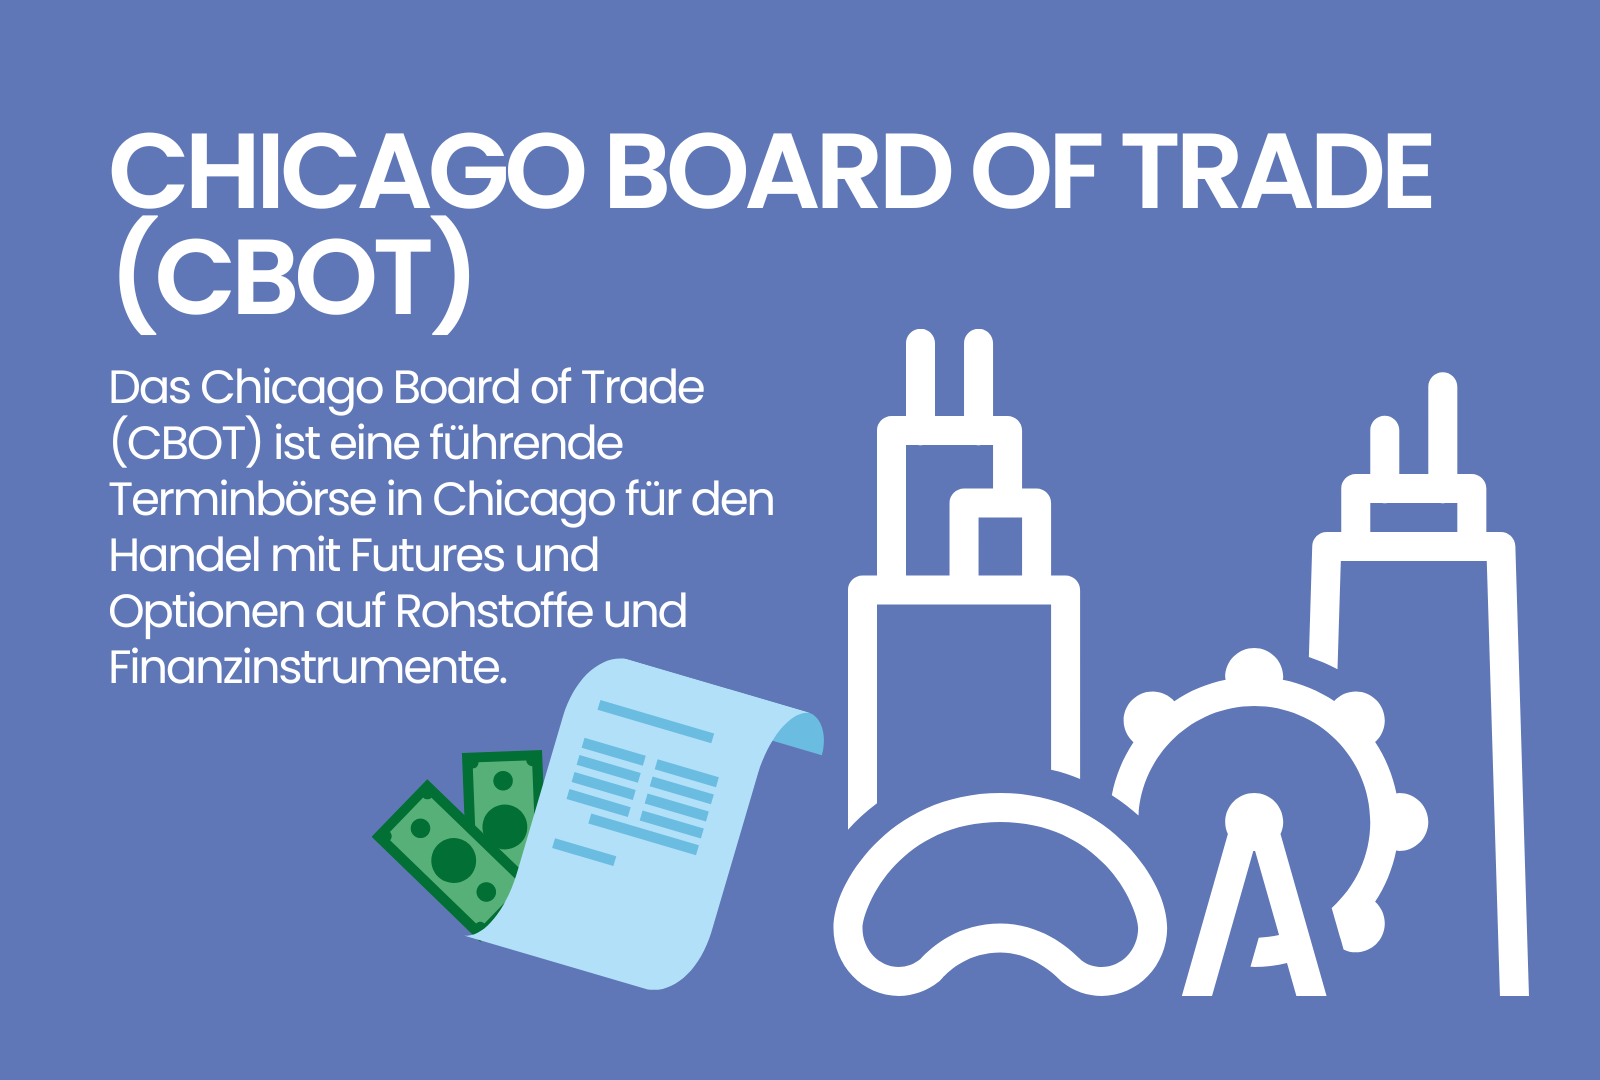 Chicago Board of Trade (CBOT)